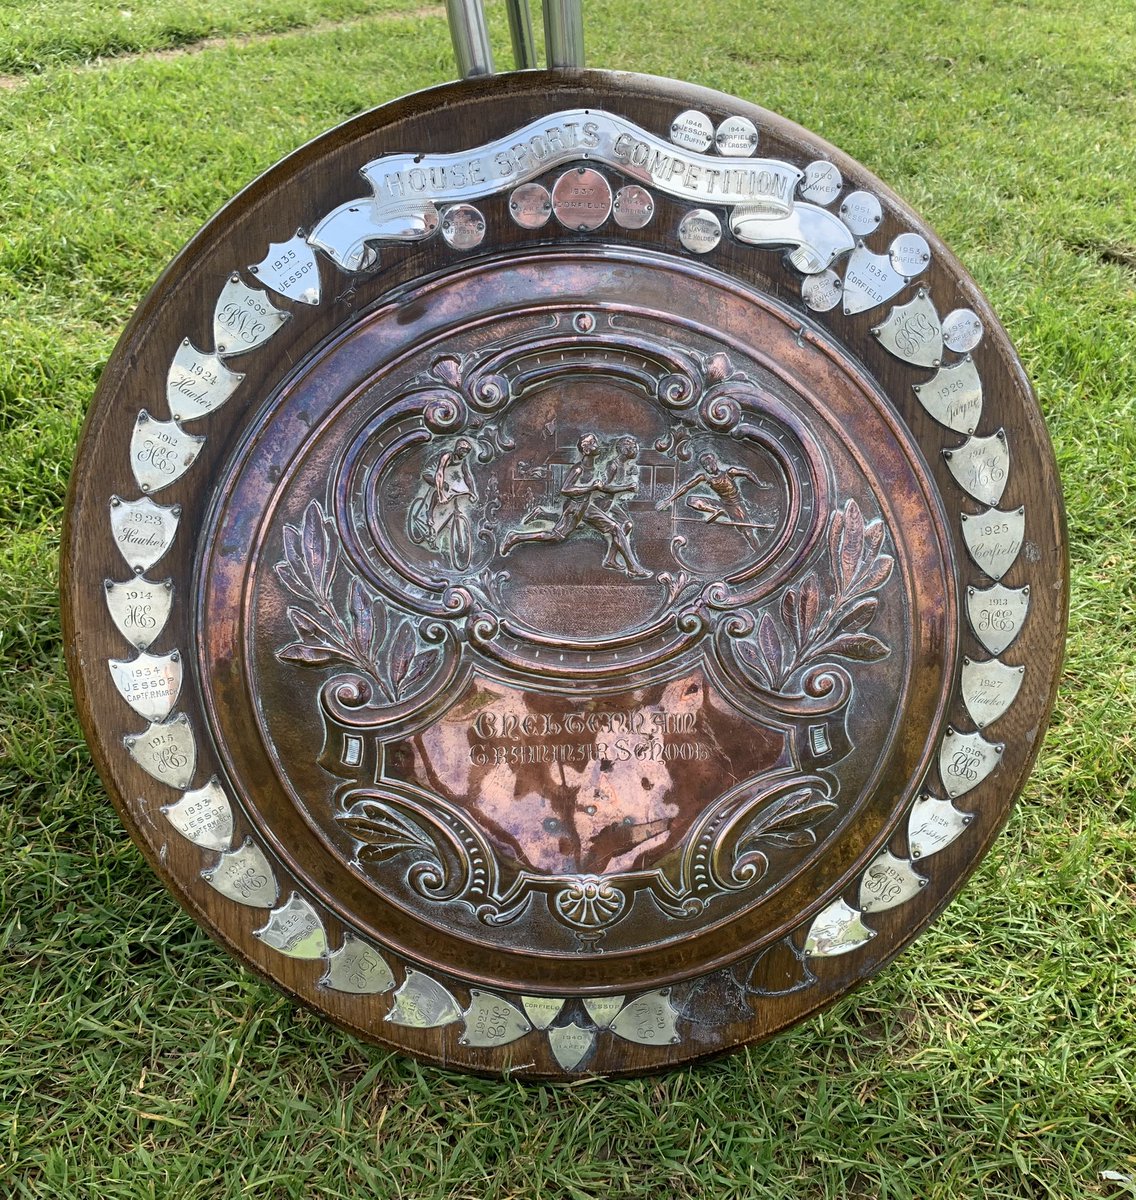 After 2 weeks of House Athletics we look forward to our Track Finals this afternoon. Which @PatesHouses is going to win the historical shield?